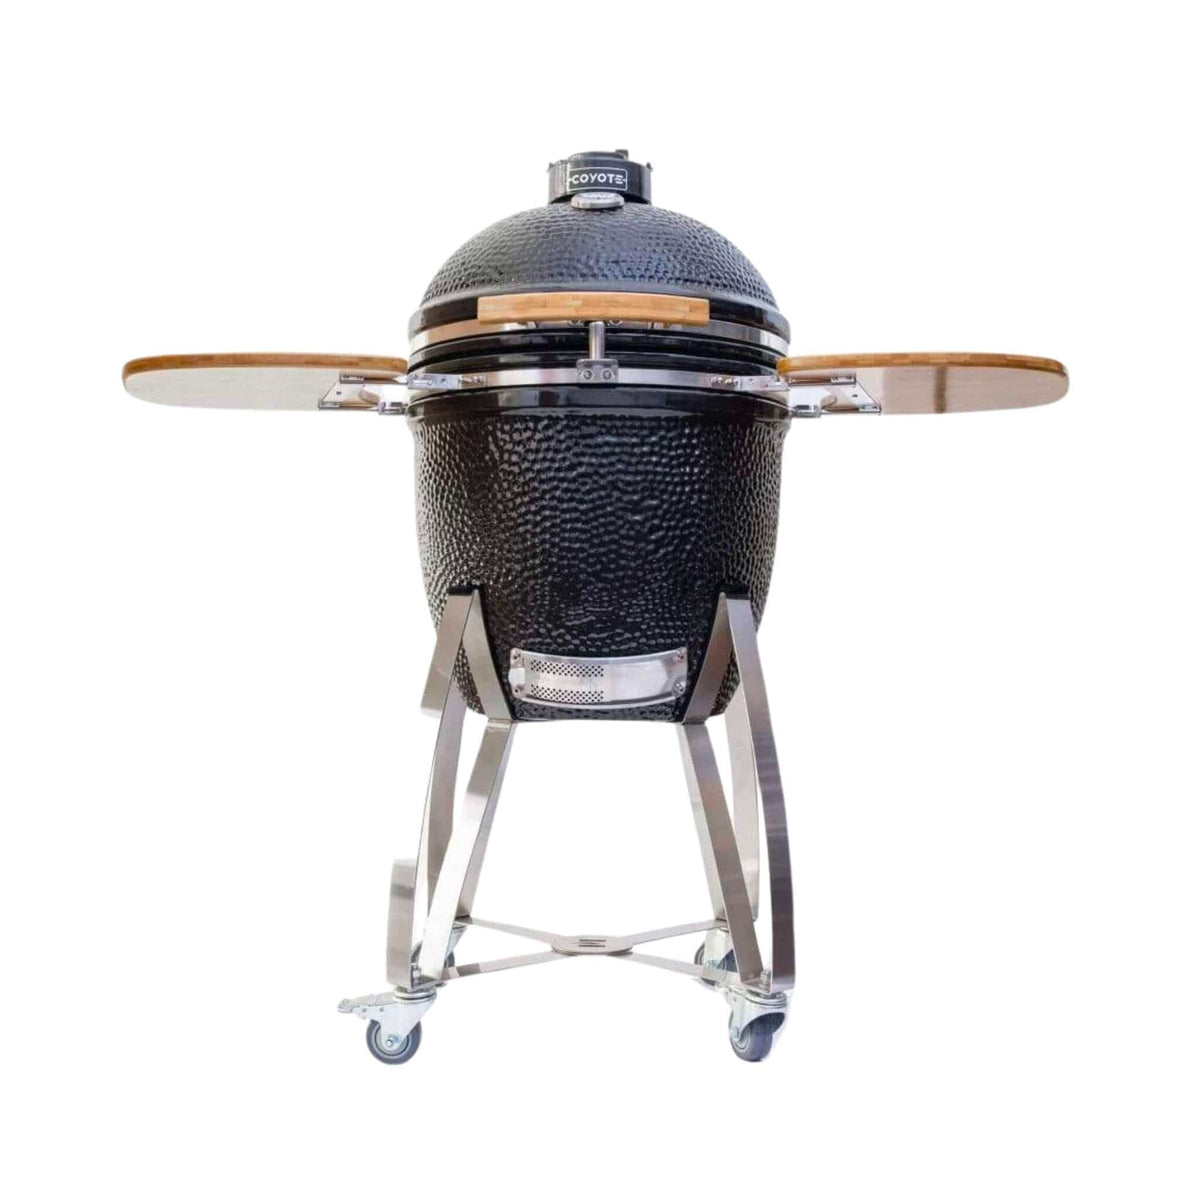 Coyote Asado Freestanding Smoker with Stand and Side Shelves